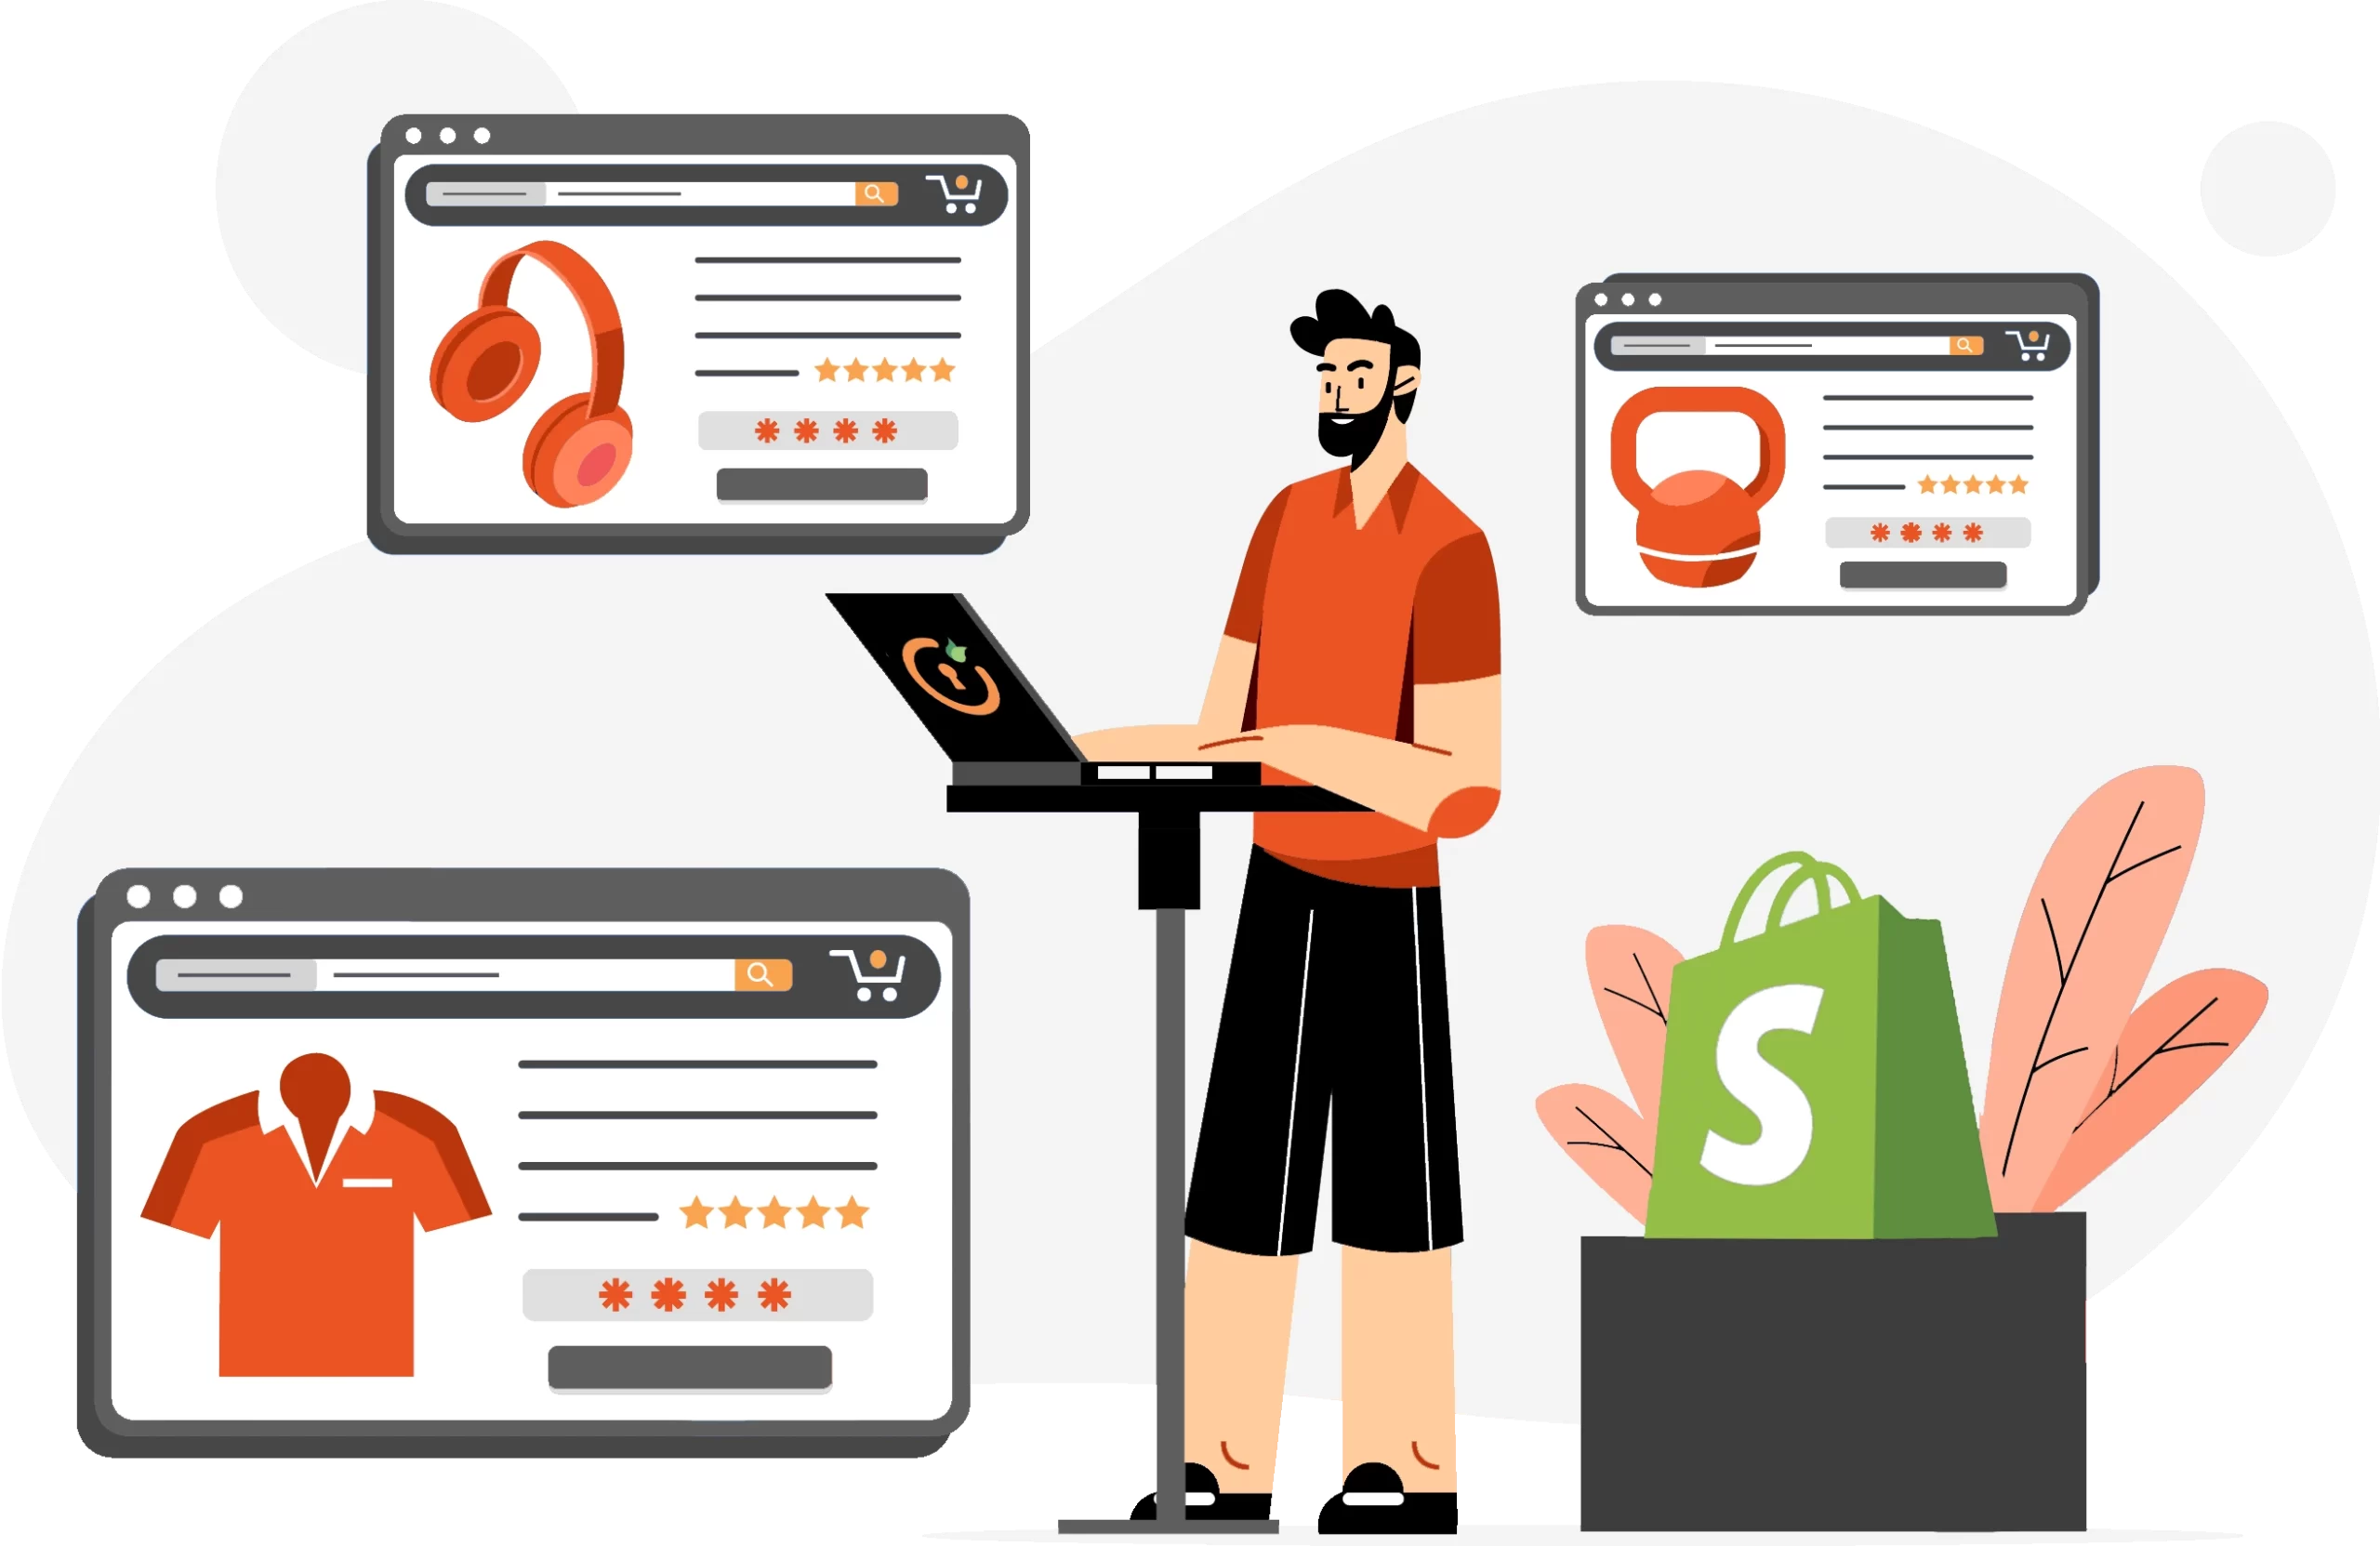 Shopify SSO into CMS/CRM - shopify CMS/CRM integration - upsell and shopify as idp